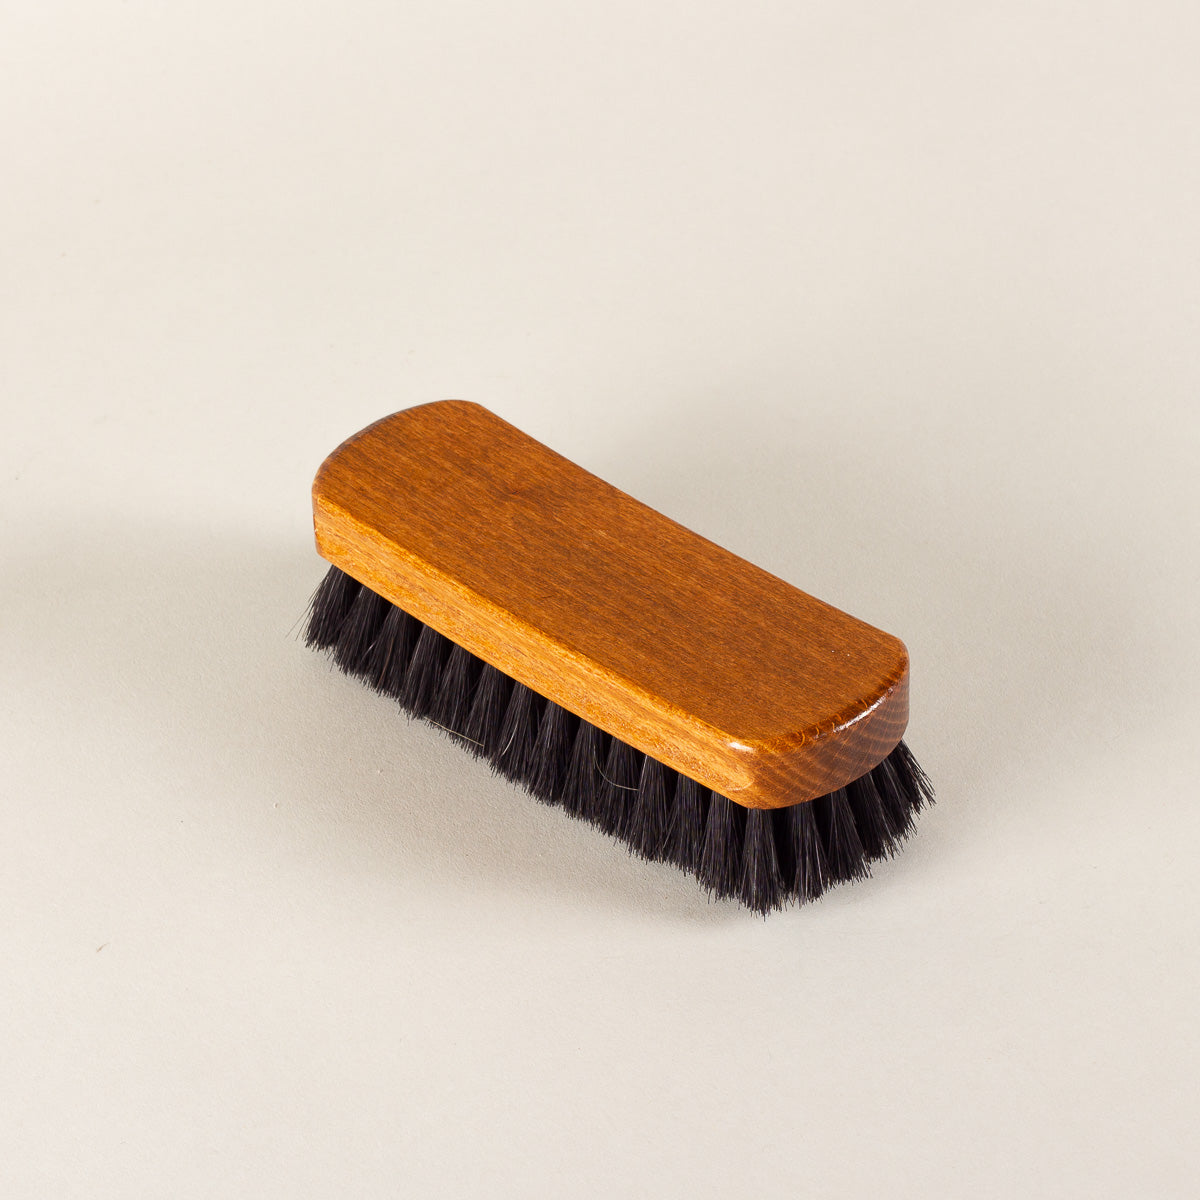 The Shoe Care Shop Set of 2 polishing brushes - 100% horsehair